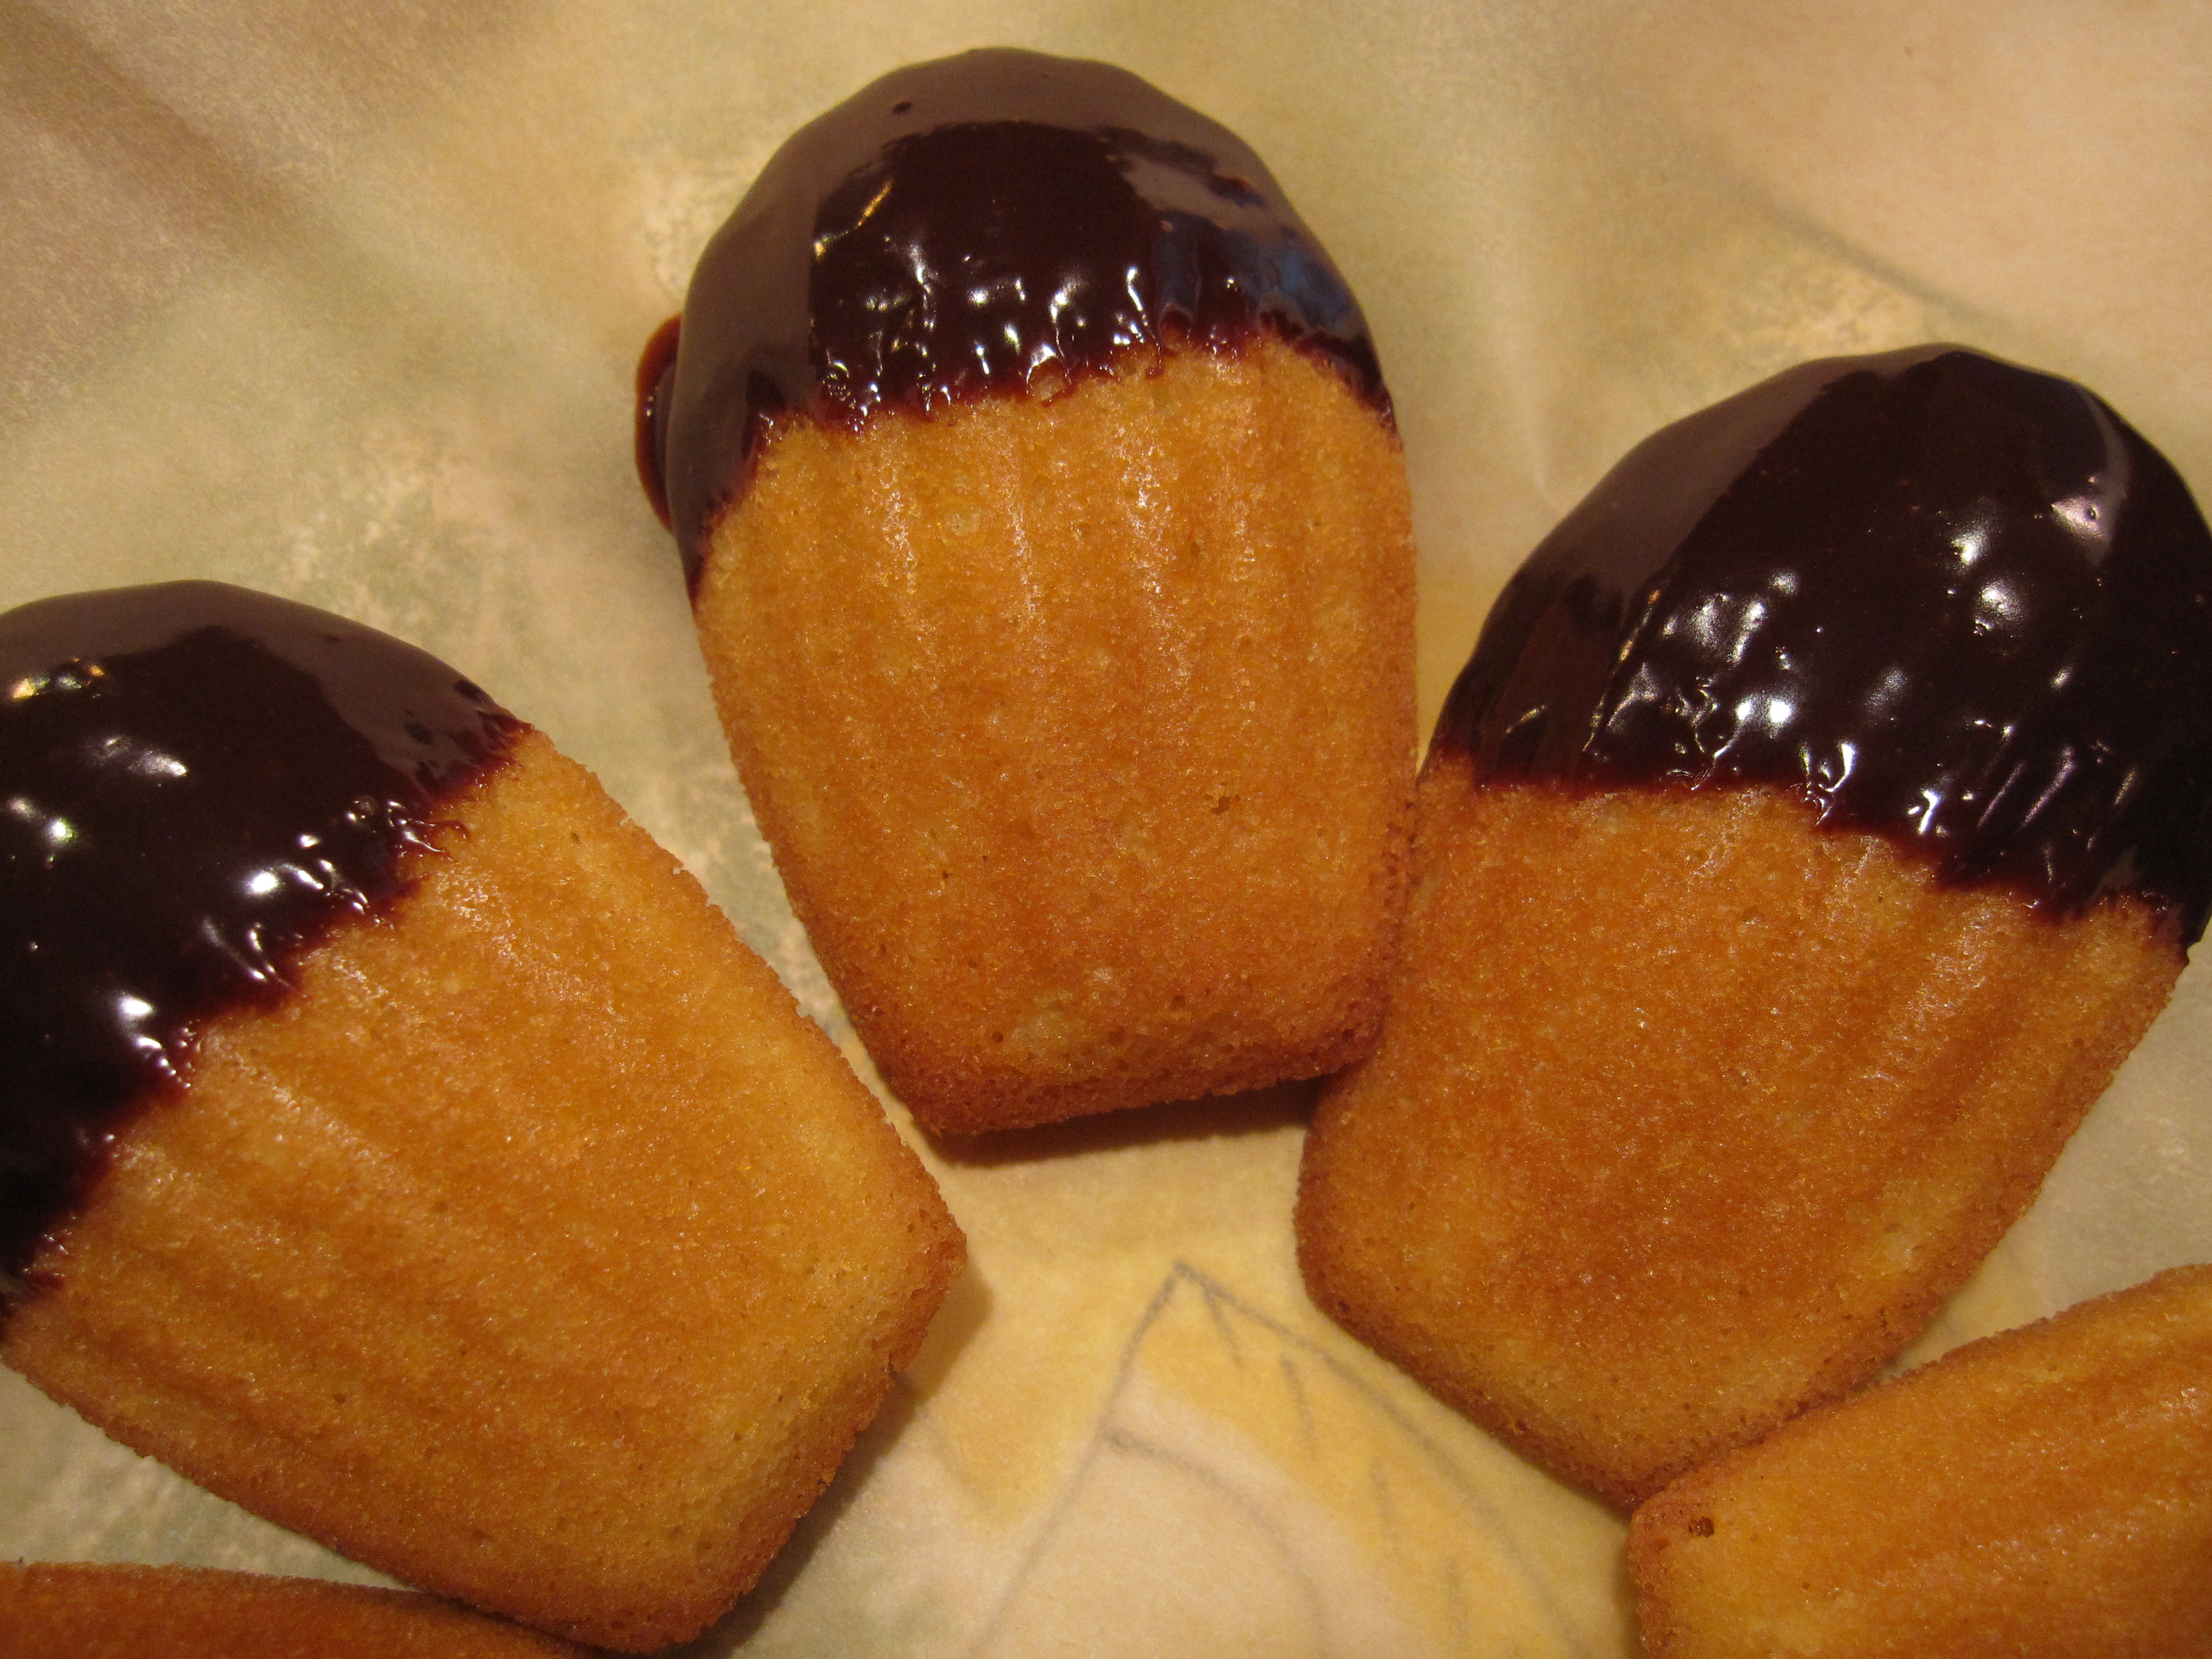 Chocolate-dipped madeleines